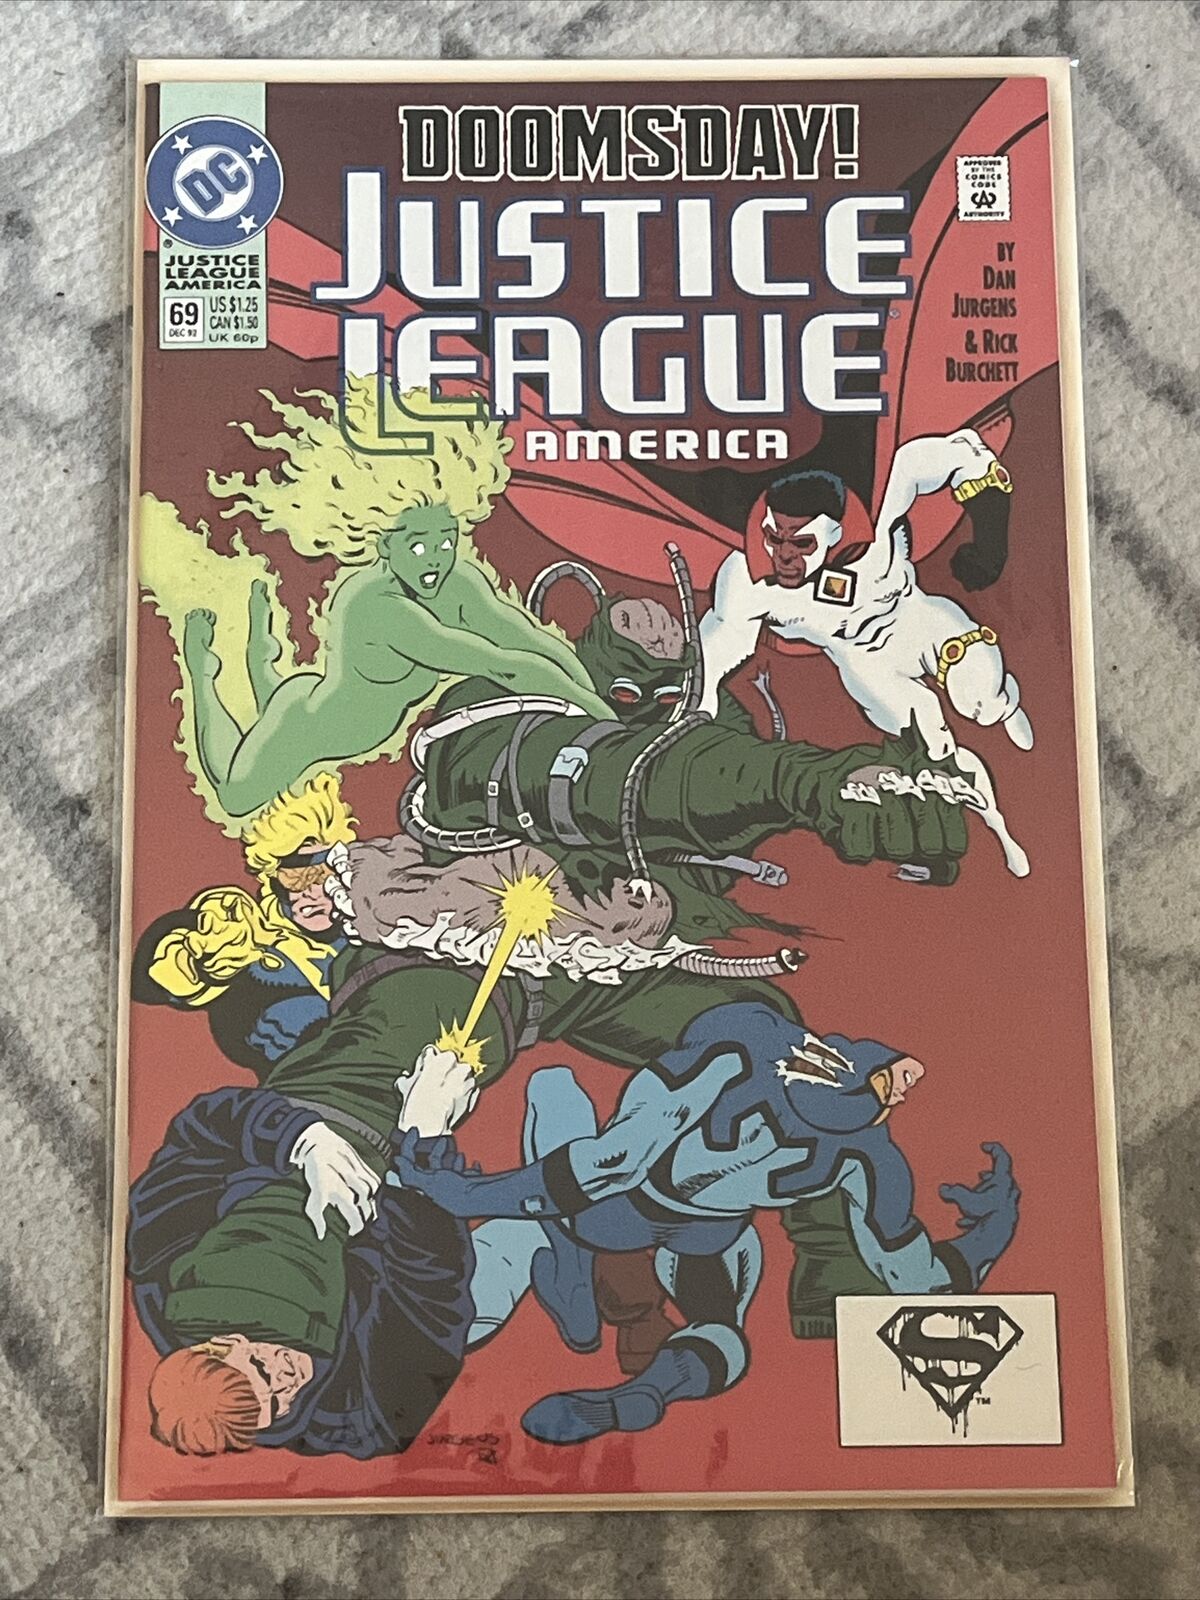 1992 DC COMICS JUSTICE LEAGUE AMERICA # 69 w/ DOOMSDAY in DOWN FOR THE COUNT